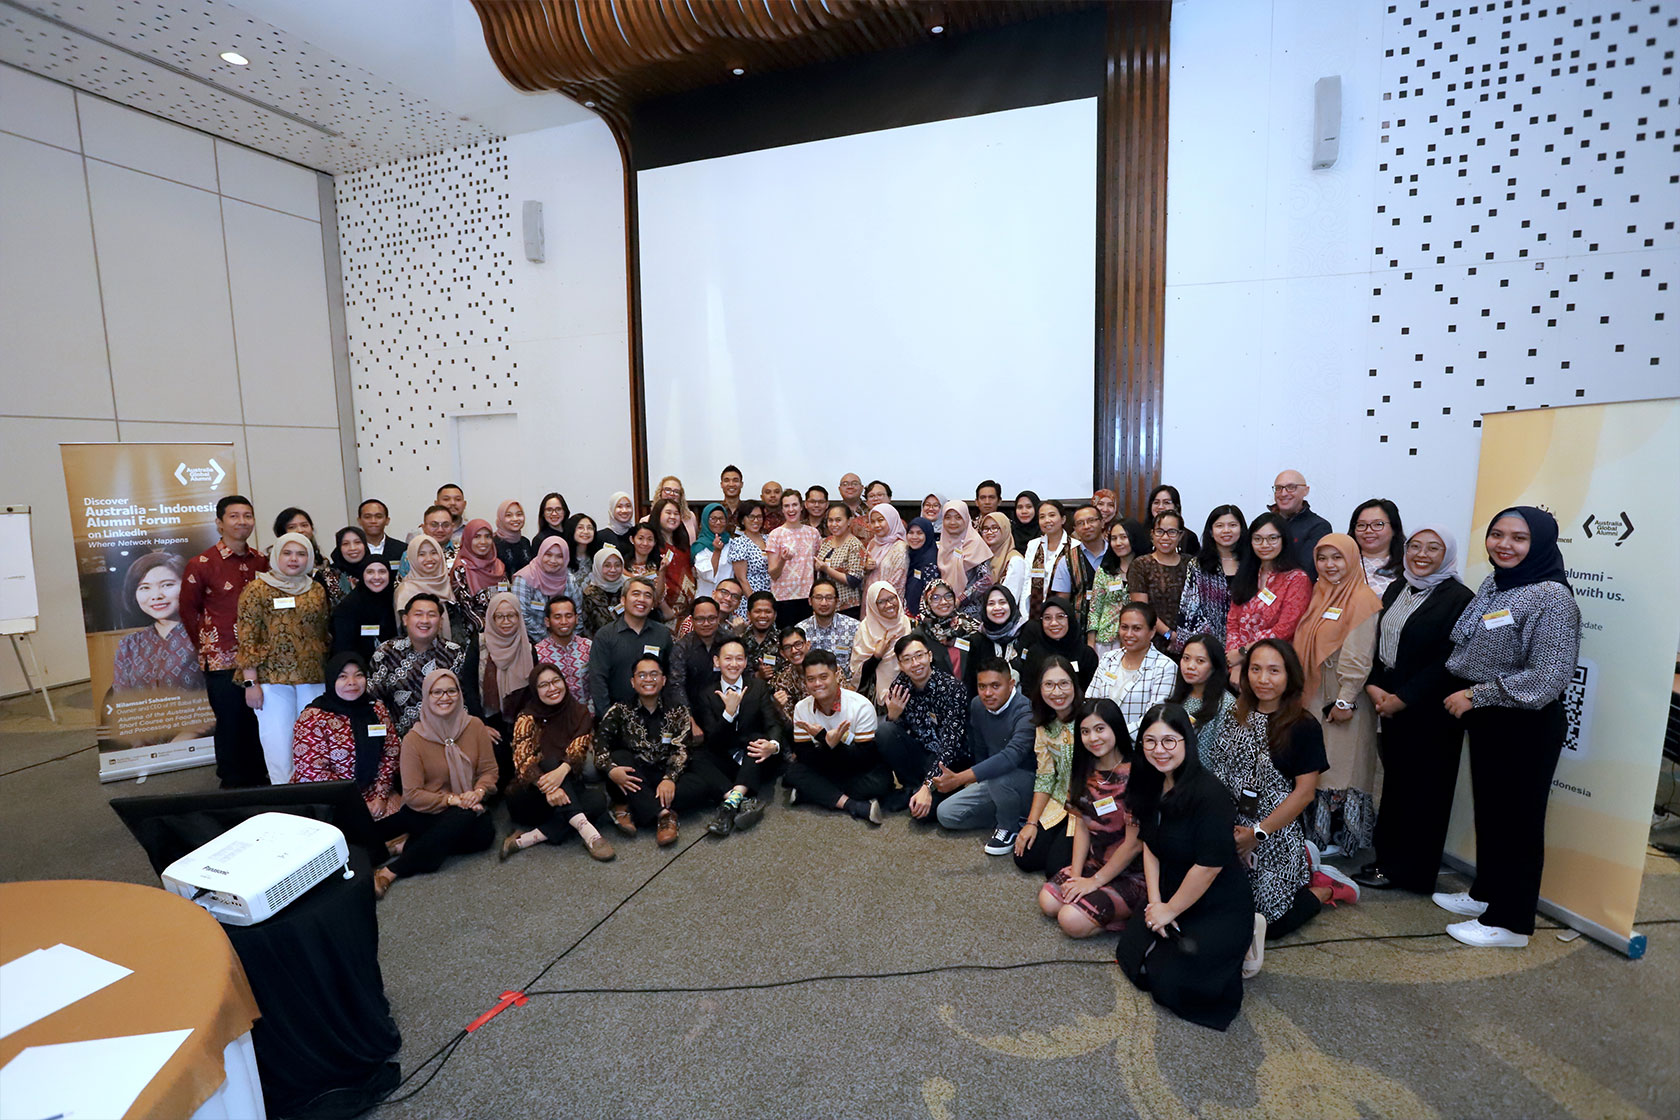 Group photo with all the participants of the Reintegration Workshop.